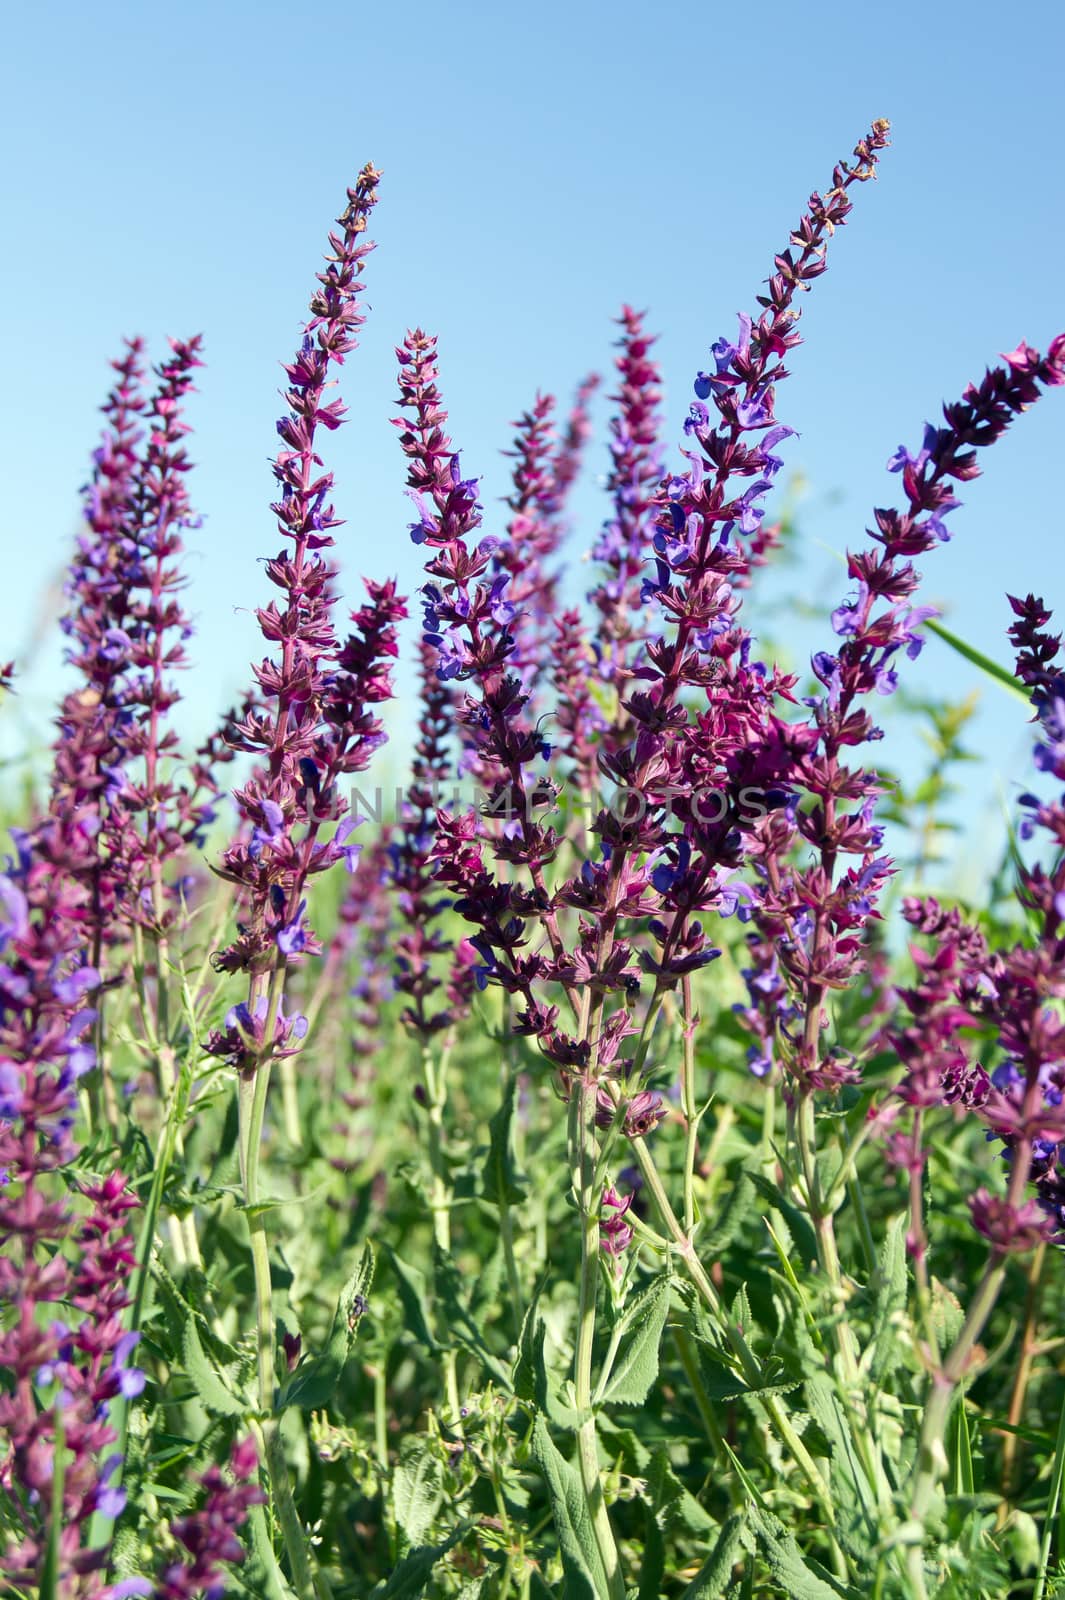 Meadow sage (Salvia pratensis) over the field.